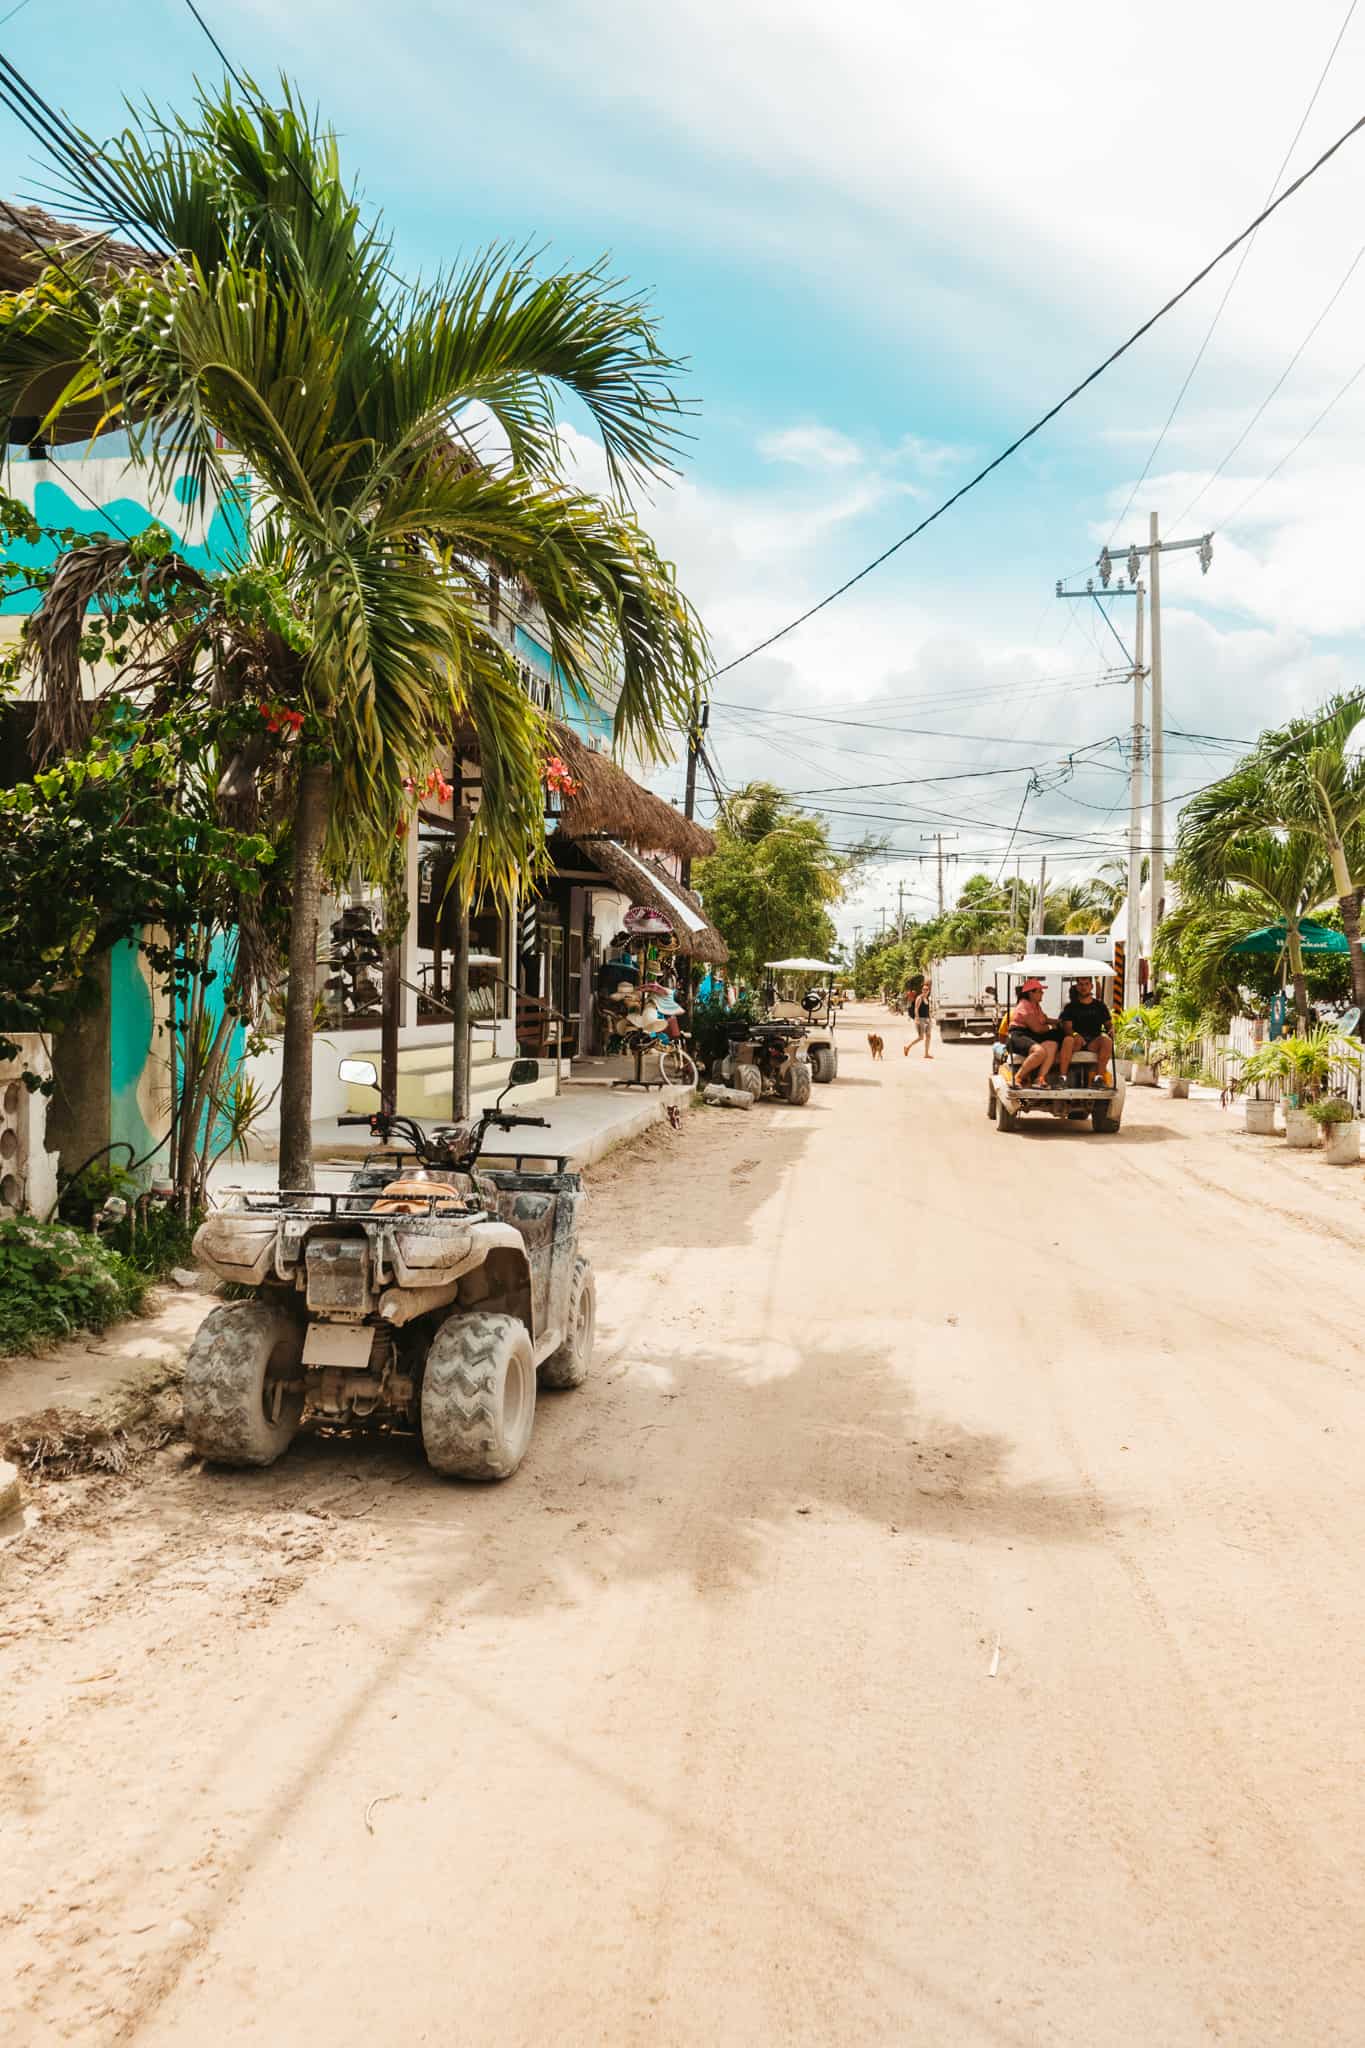 Rent a Golf Cart in Isla Holbox, Mexico